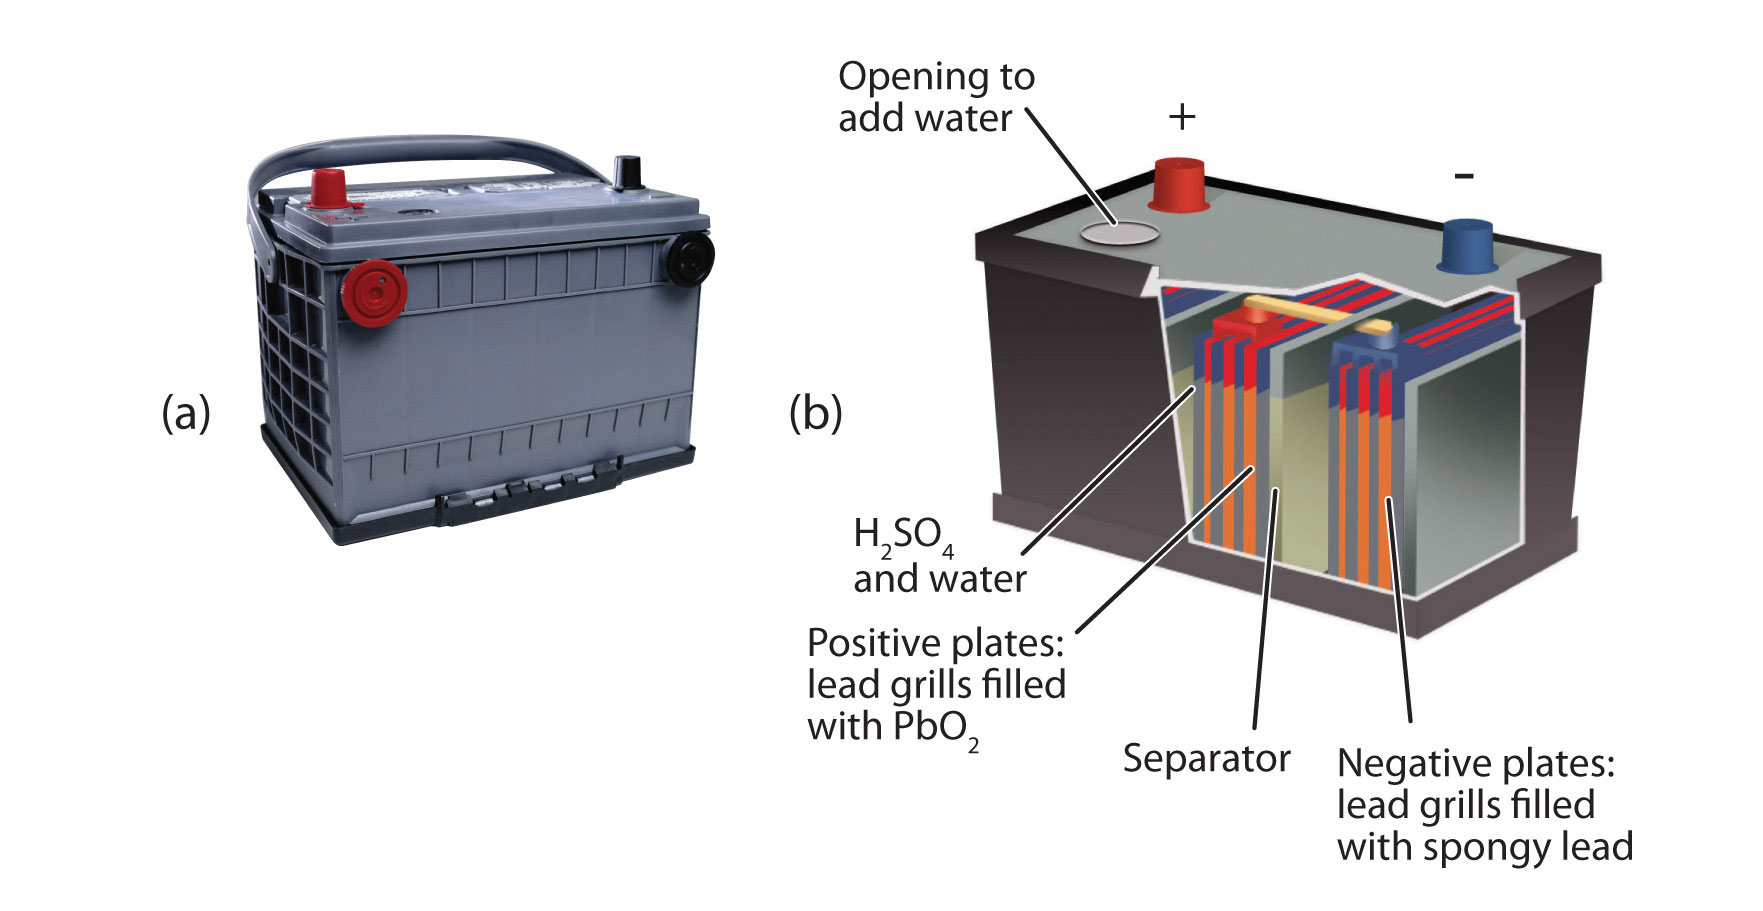 The lead storage battery consists of an opening to add water, H2SO4 and water, positive plates, a separator, and negative plates.